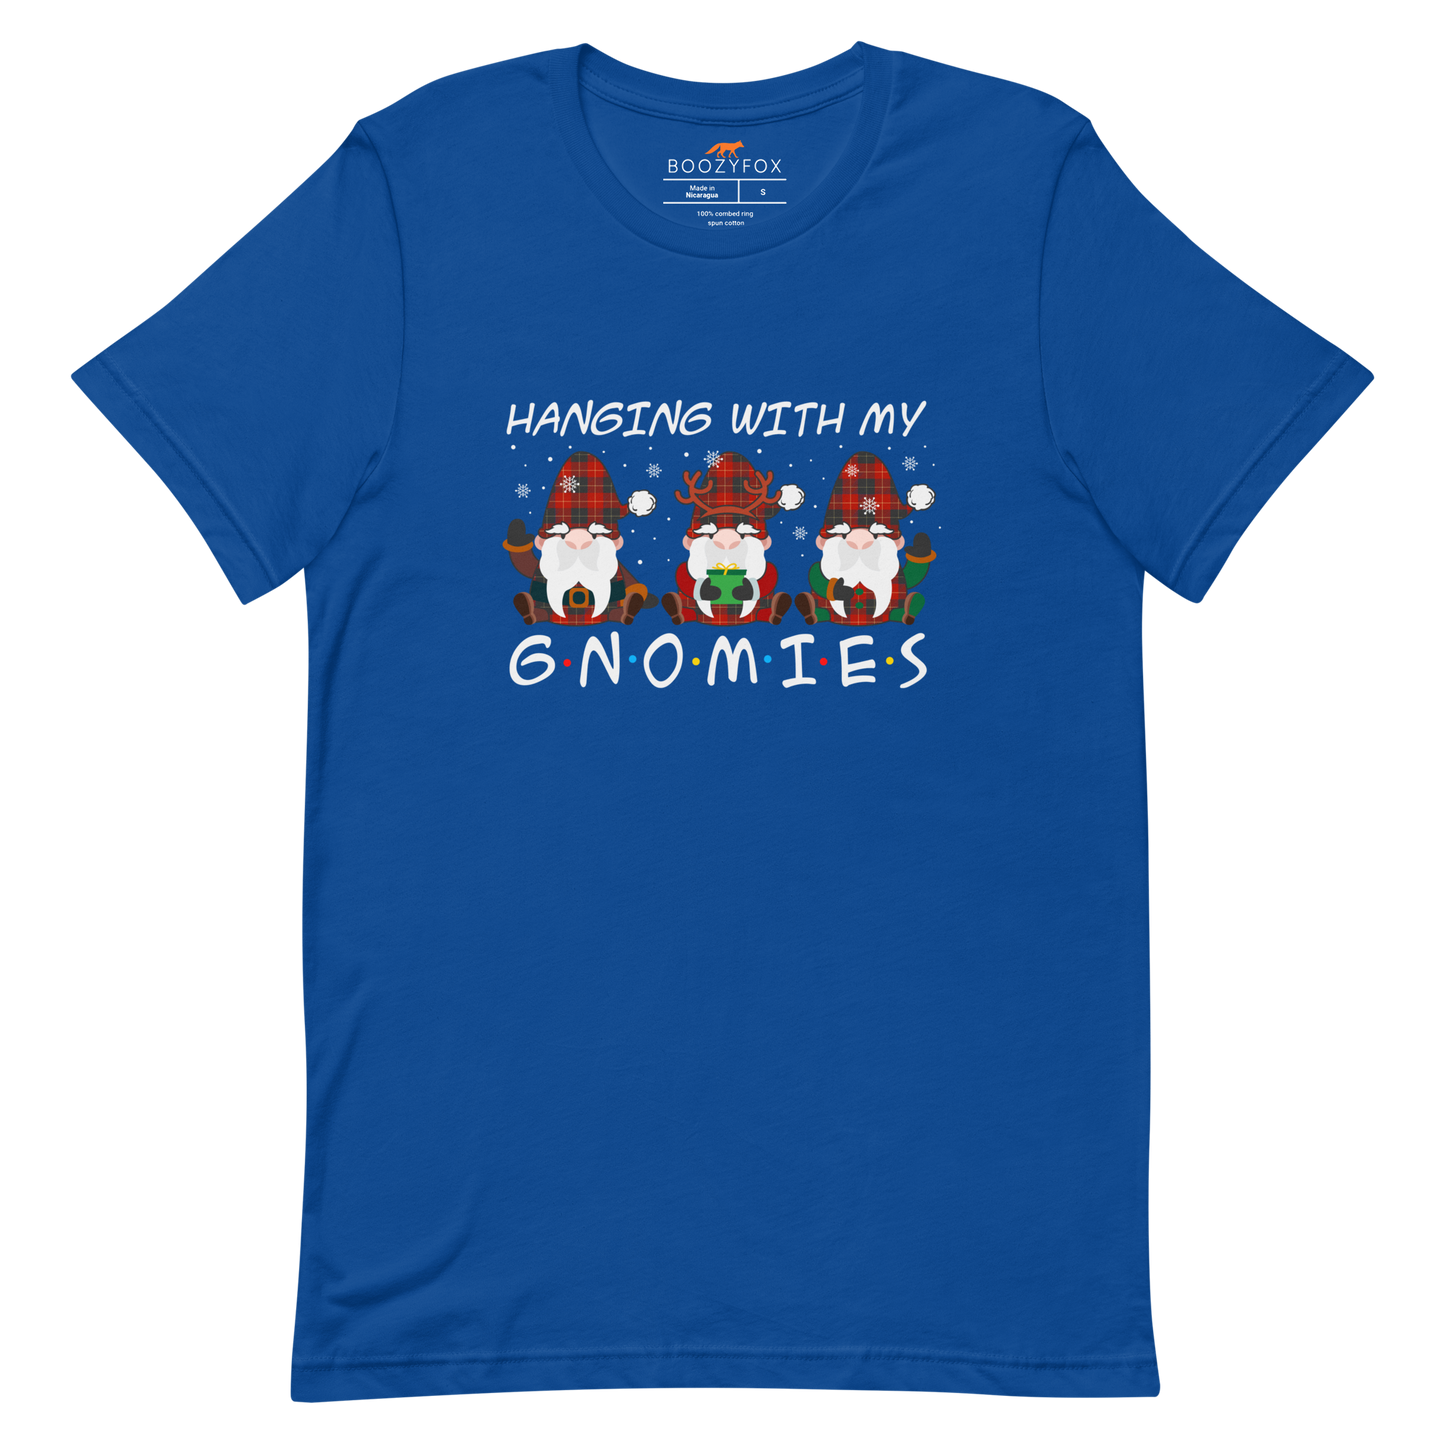 True Royal Premium Christmas Gnome Tee featuring a delight Hanging With My Gnomies graphic on the chest - Funny Christmas Graphic Gnome Tees - Boozy Fox